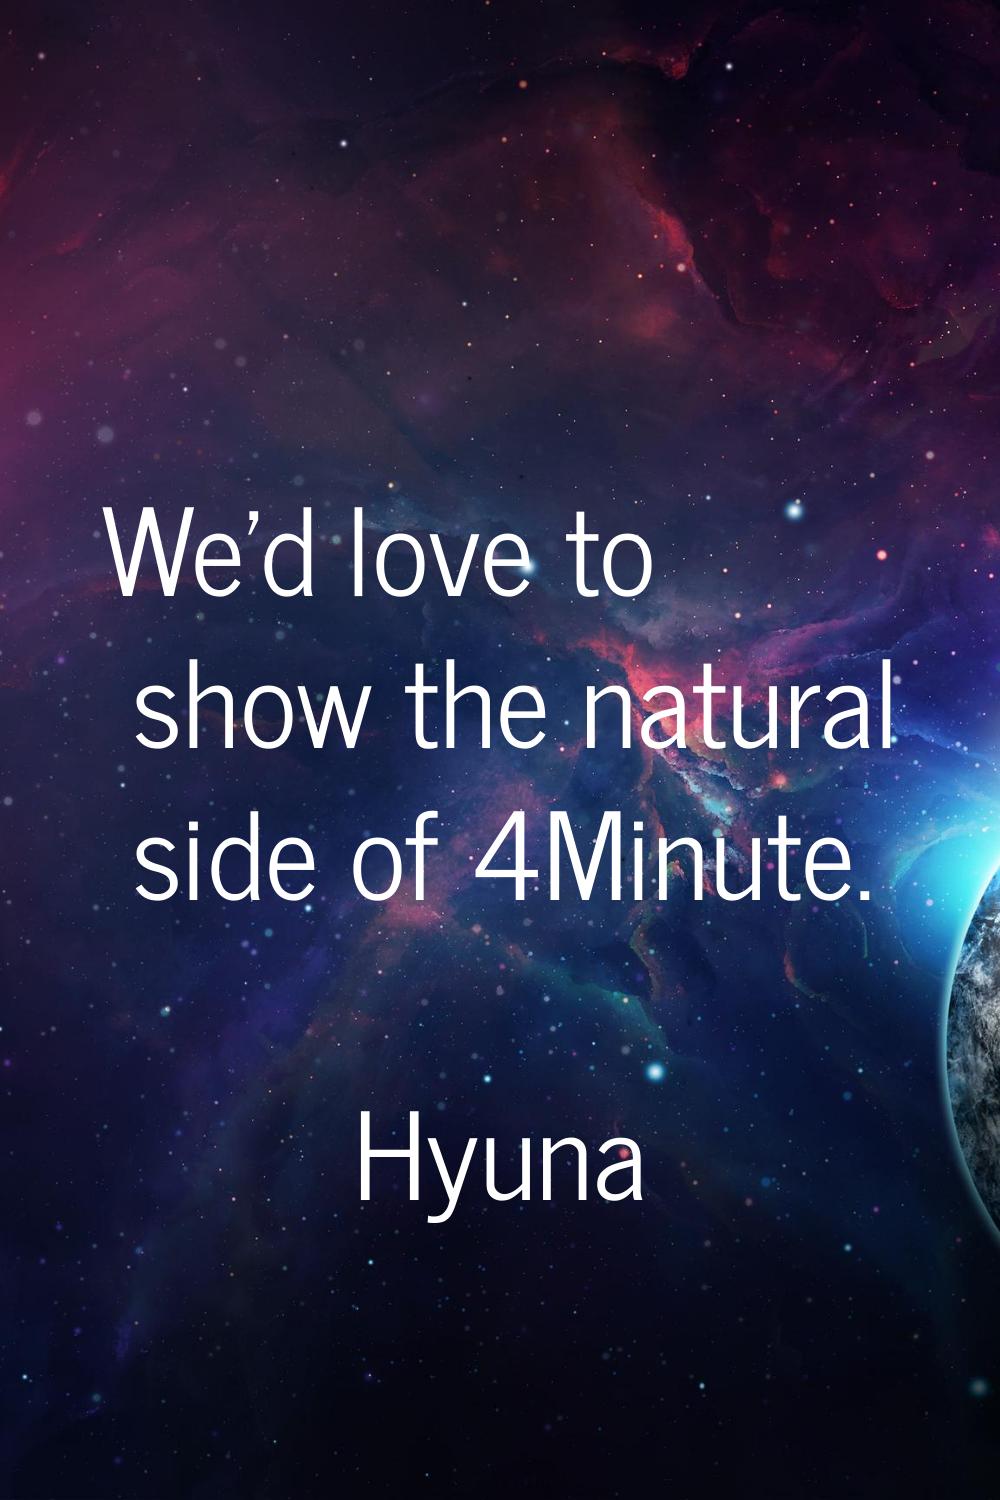 We'd love to show the natural side of 4Minute.